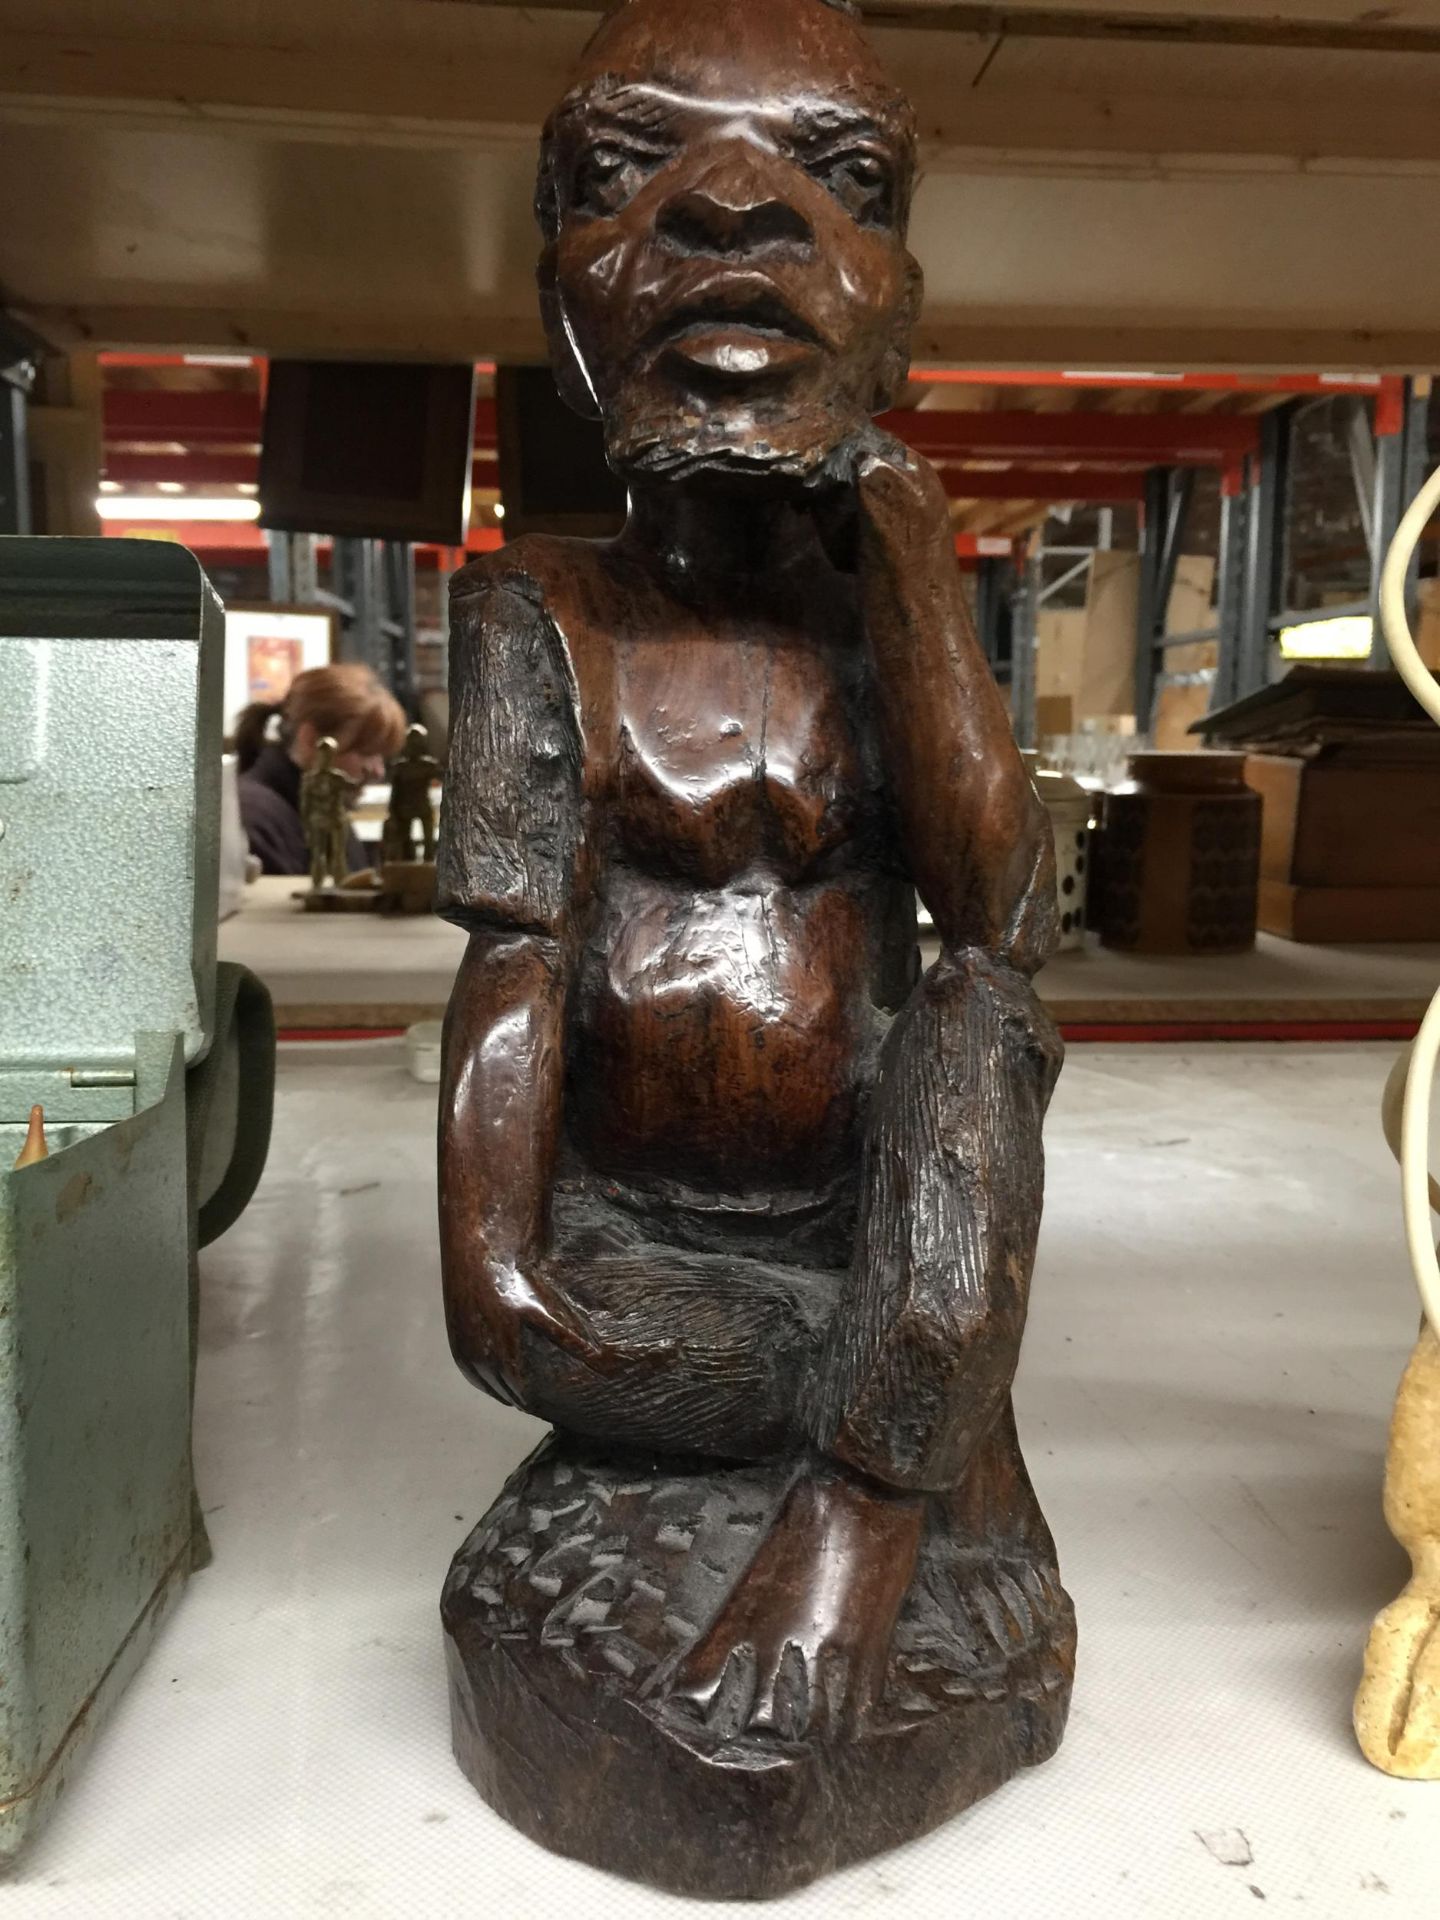 A HEAVY WOODEN CARVED TRIBAL STYLE FIGURE, HEIGHT 34CM